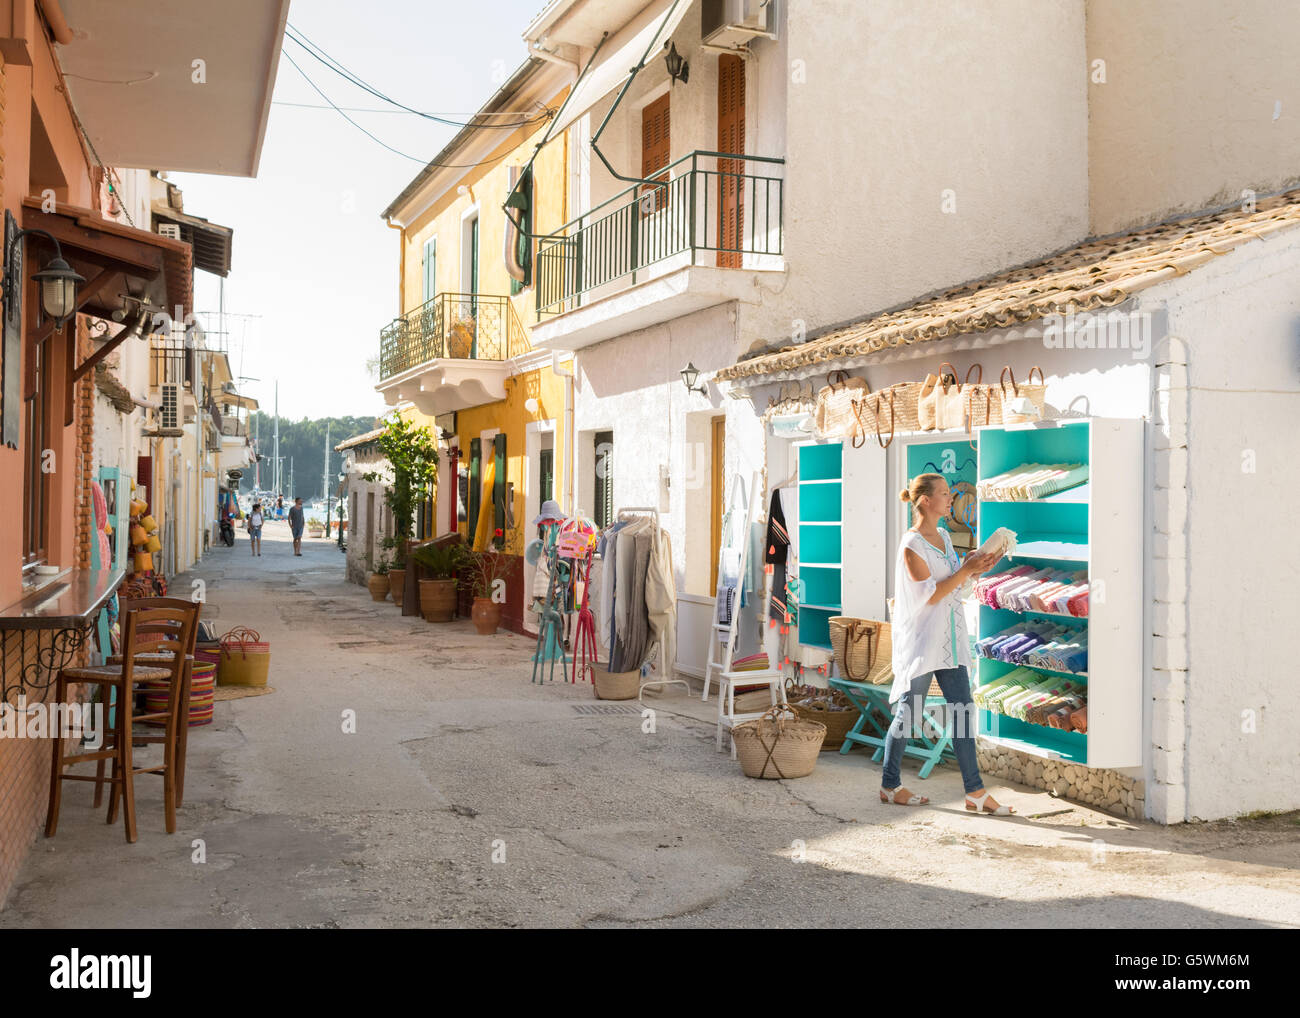 Lakka, Paxos, Greece - young woman setting up her shop (Mare) selling clothing and accessories Stock Photo